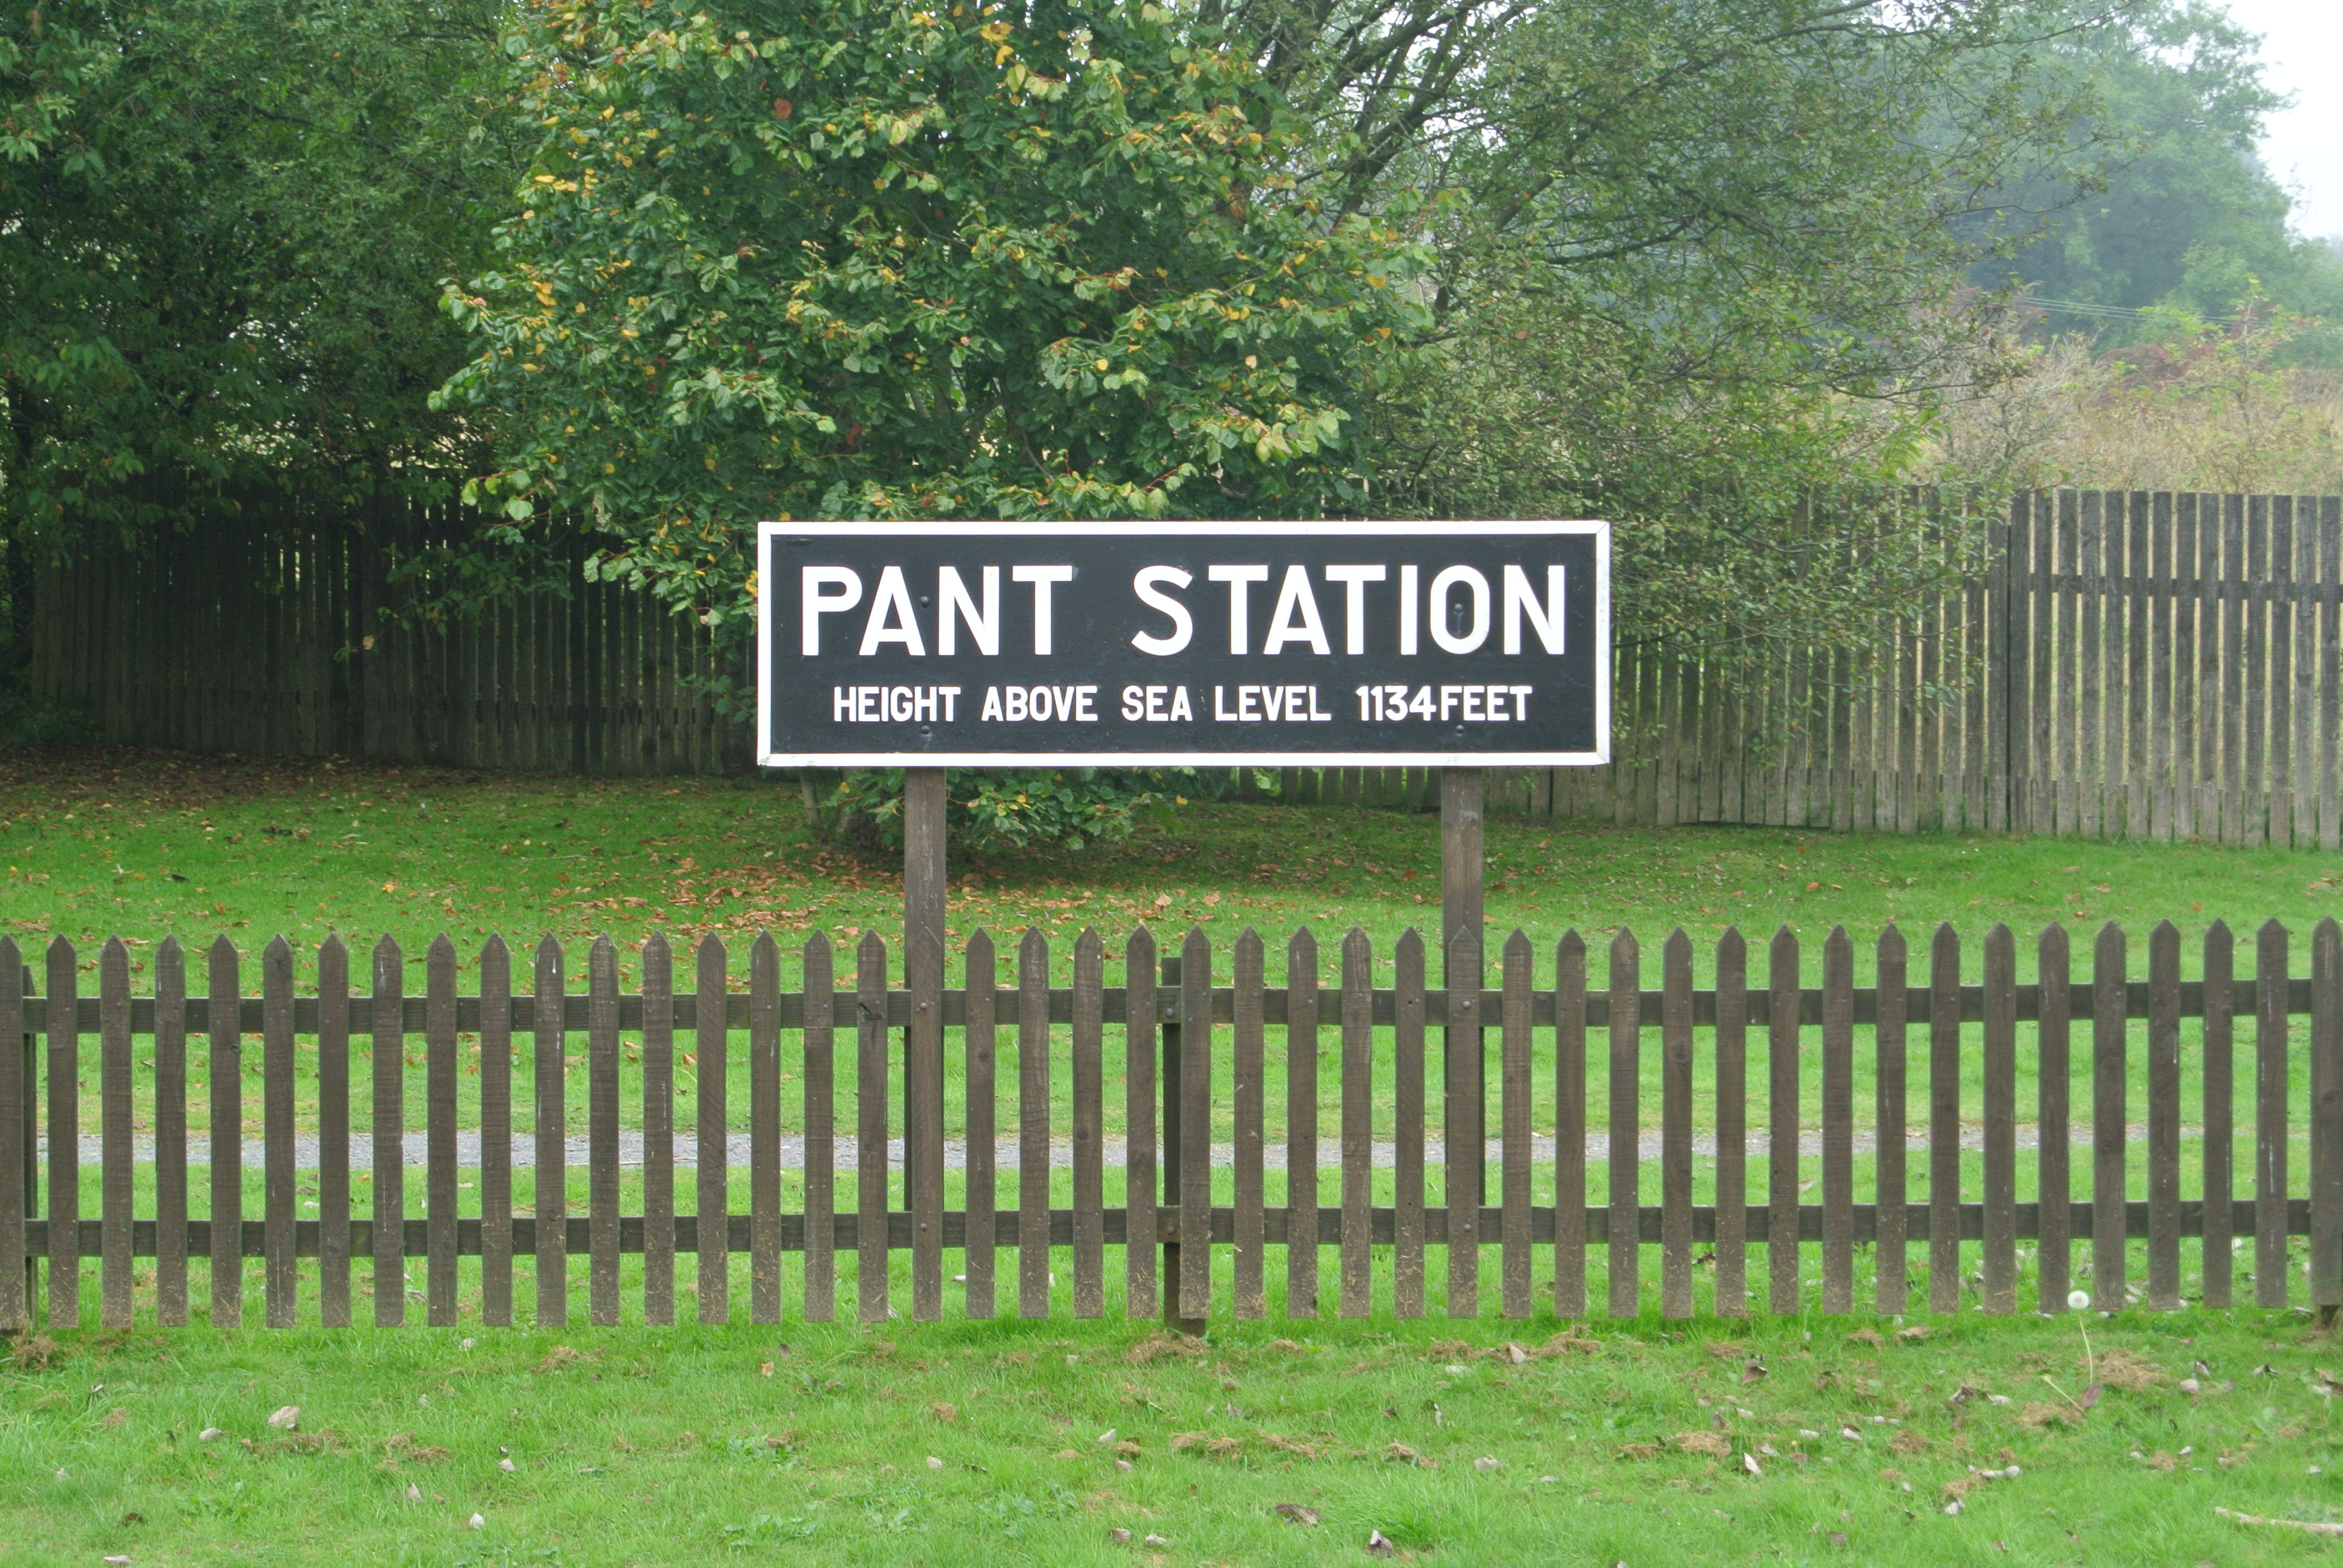 Pant Station photos by juliamaud